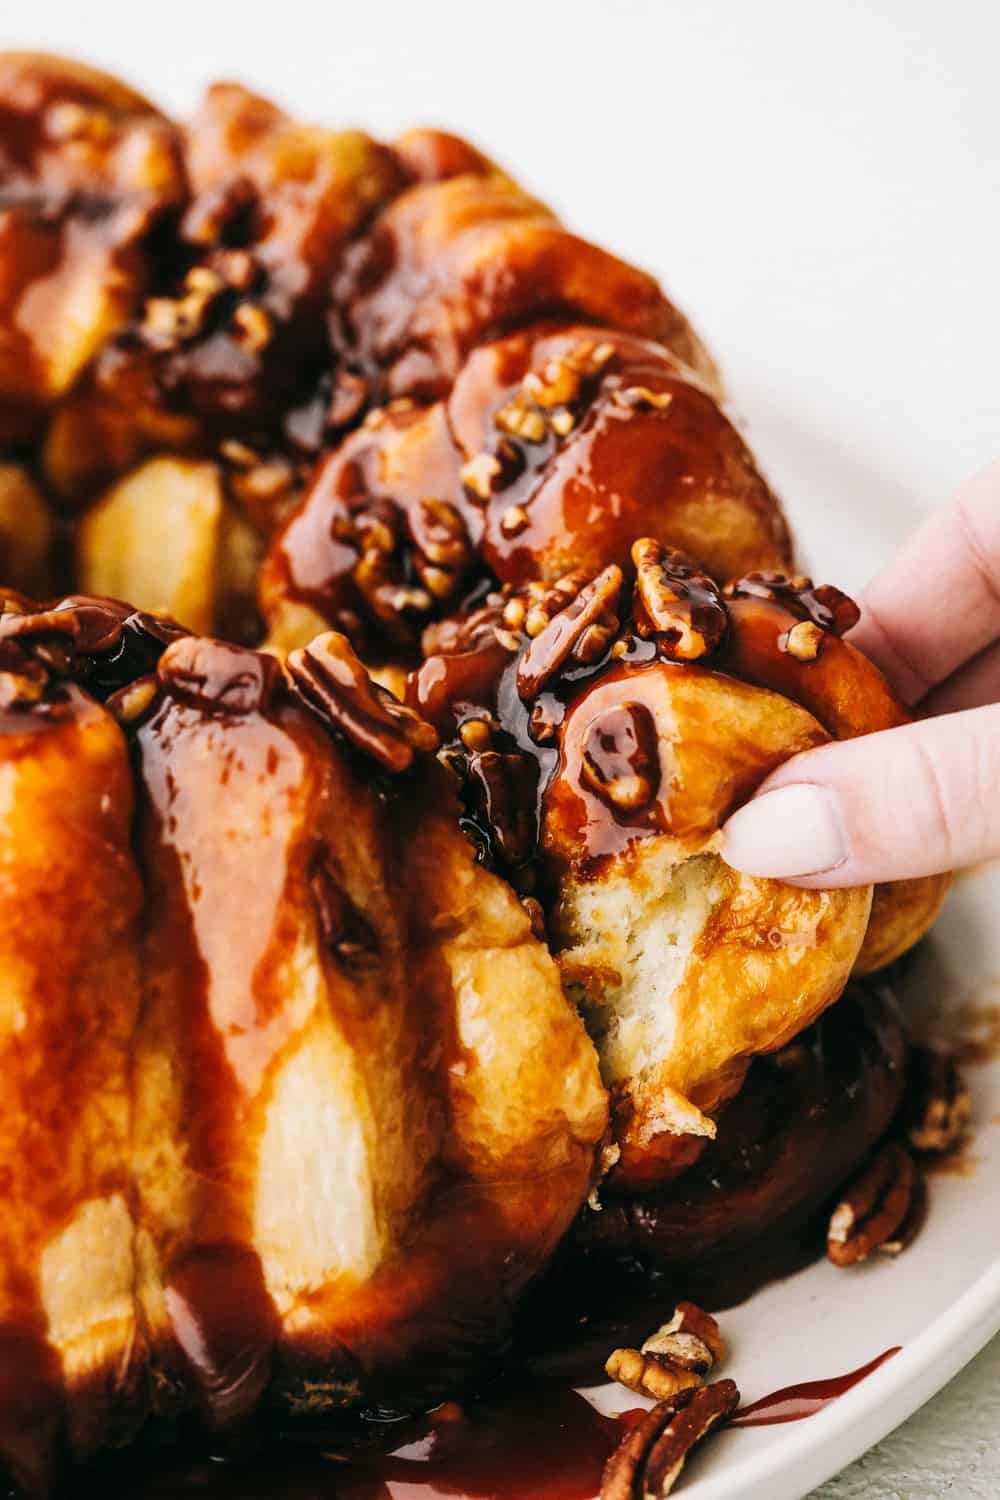 Sticky, sweet, gooey and delicious Sticky Buns.